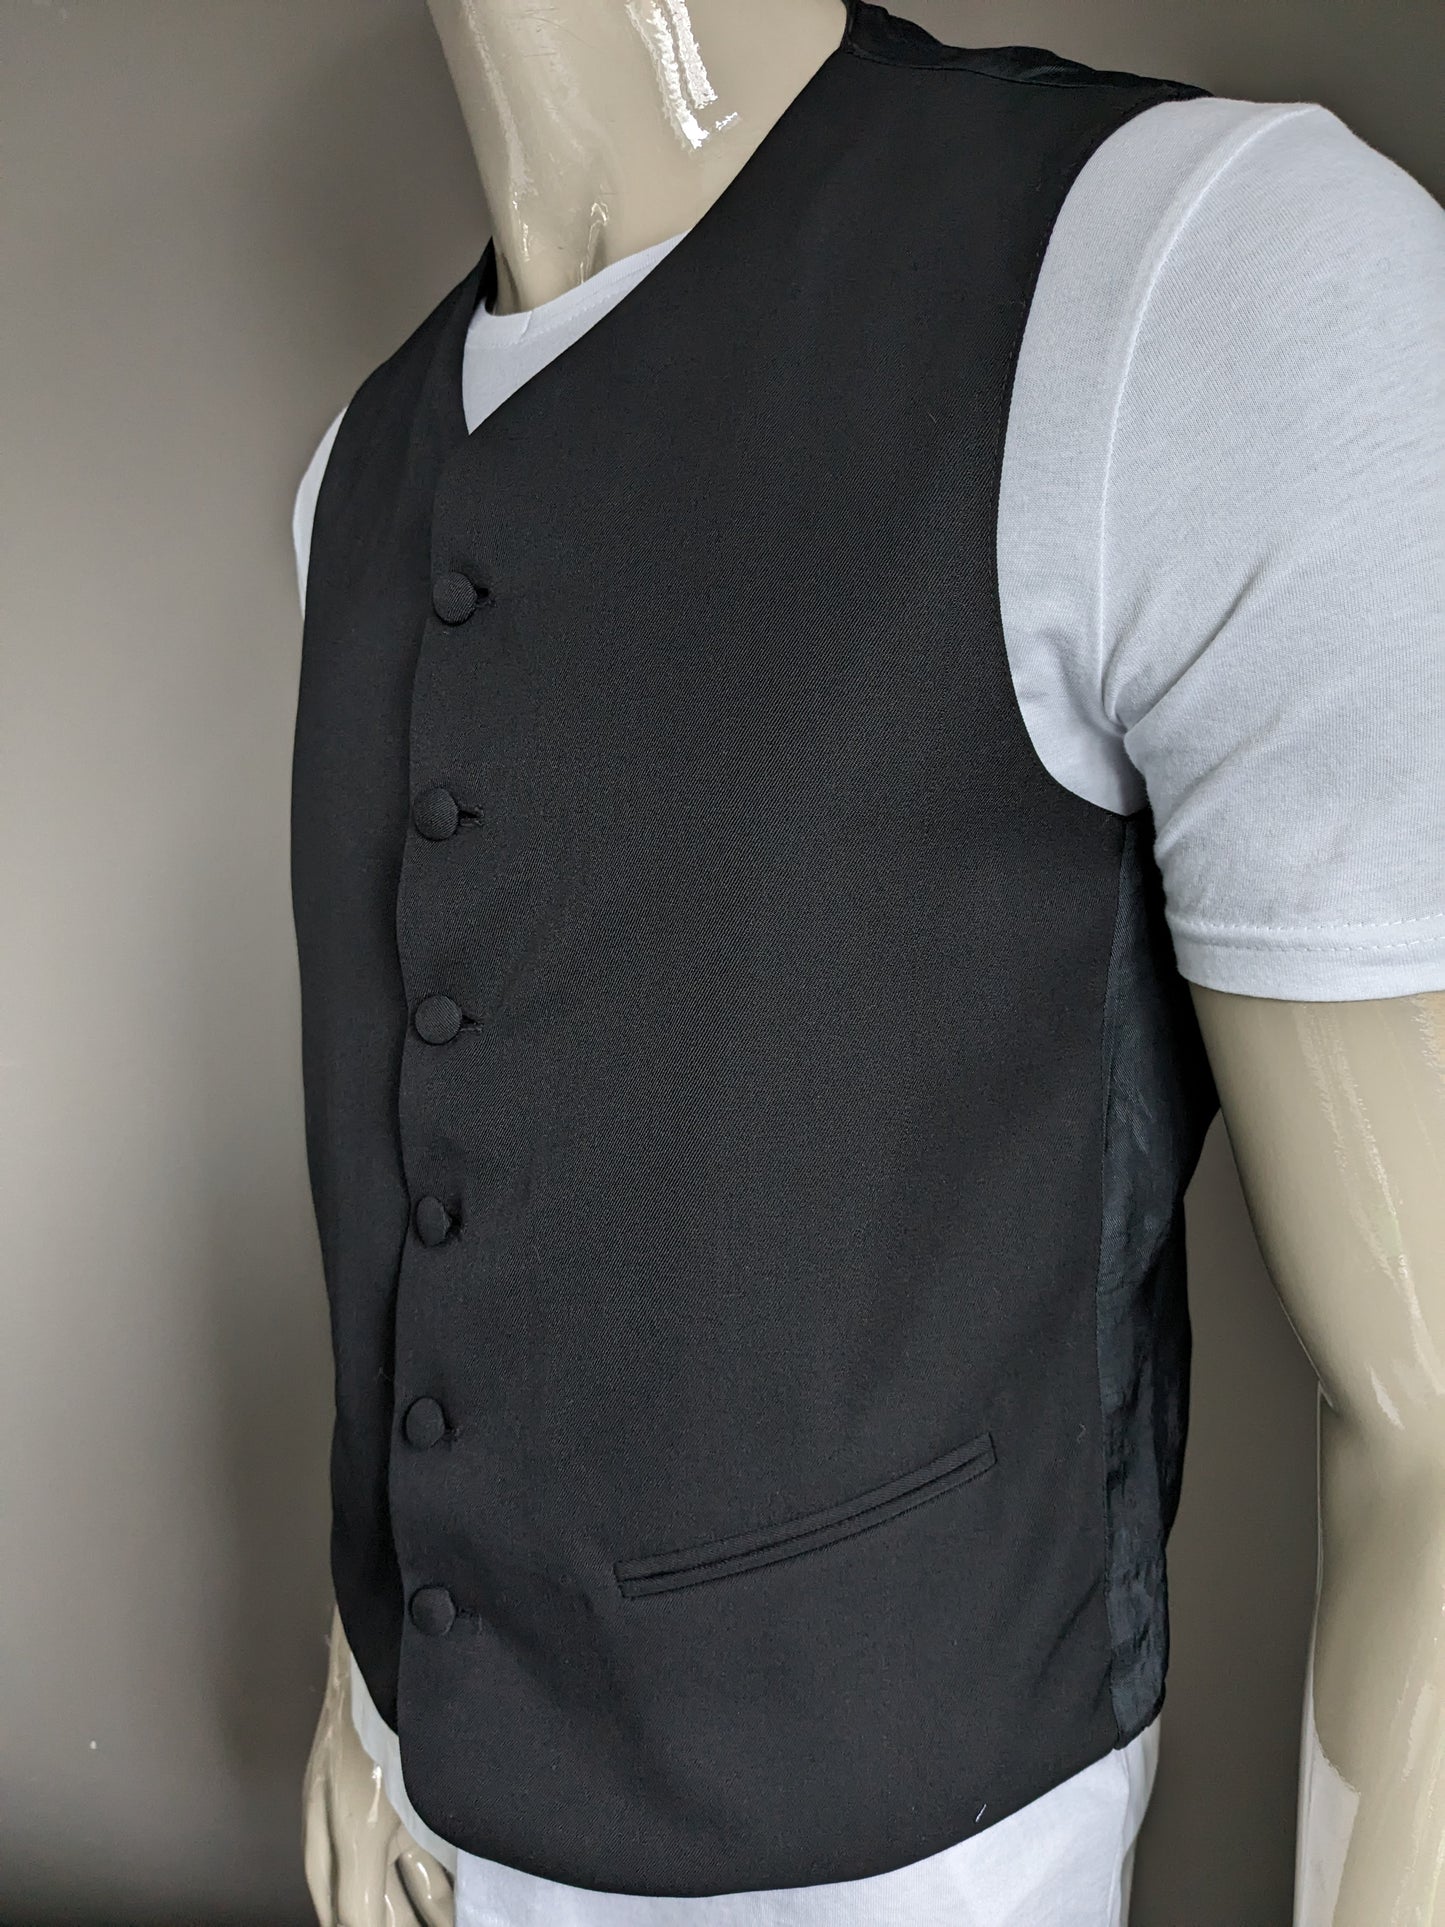 Gilet with upholstered buttons. Black colored. Size M. #337.